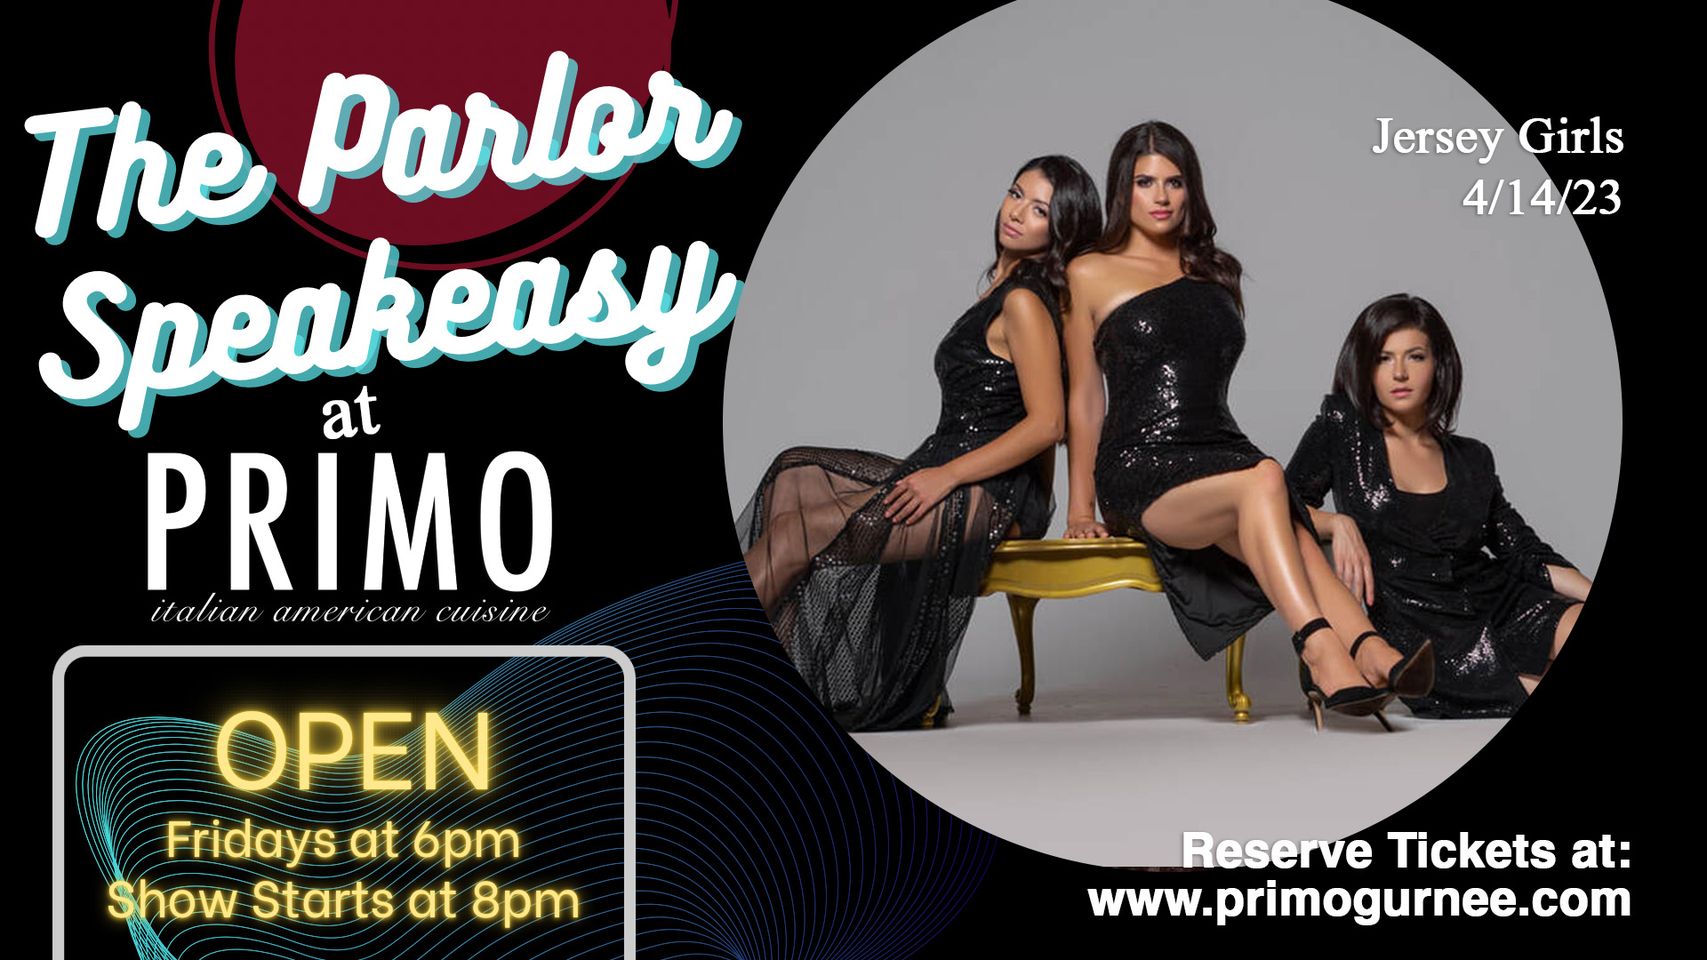 Jersey Girls in The Parlor at Primo